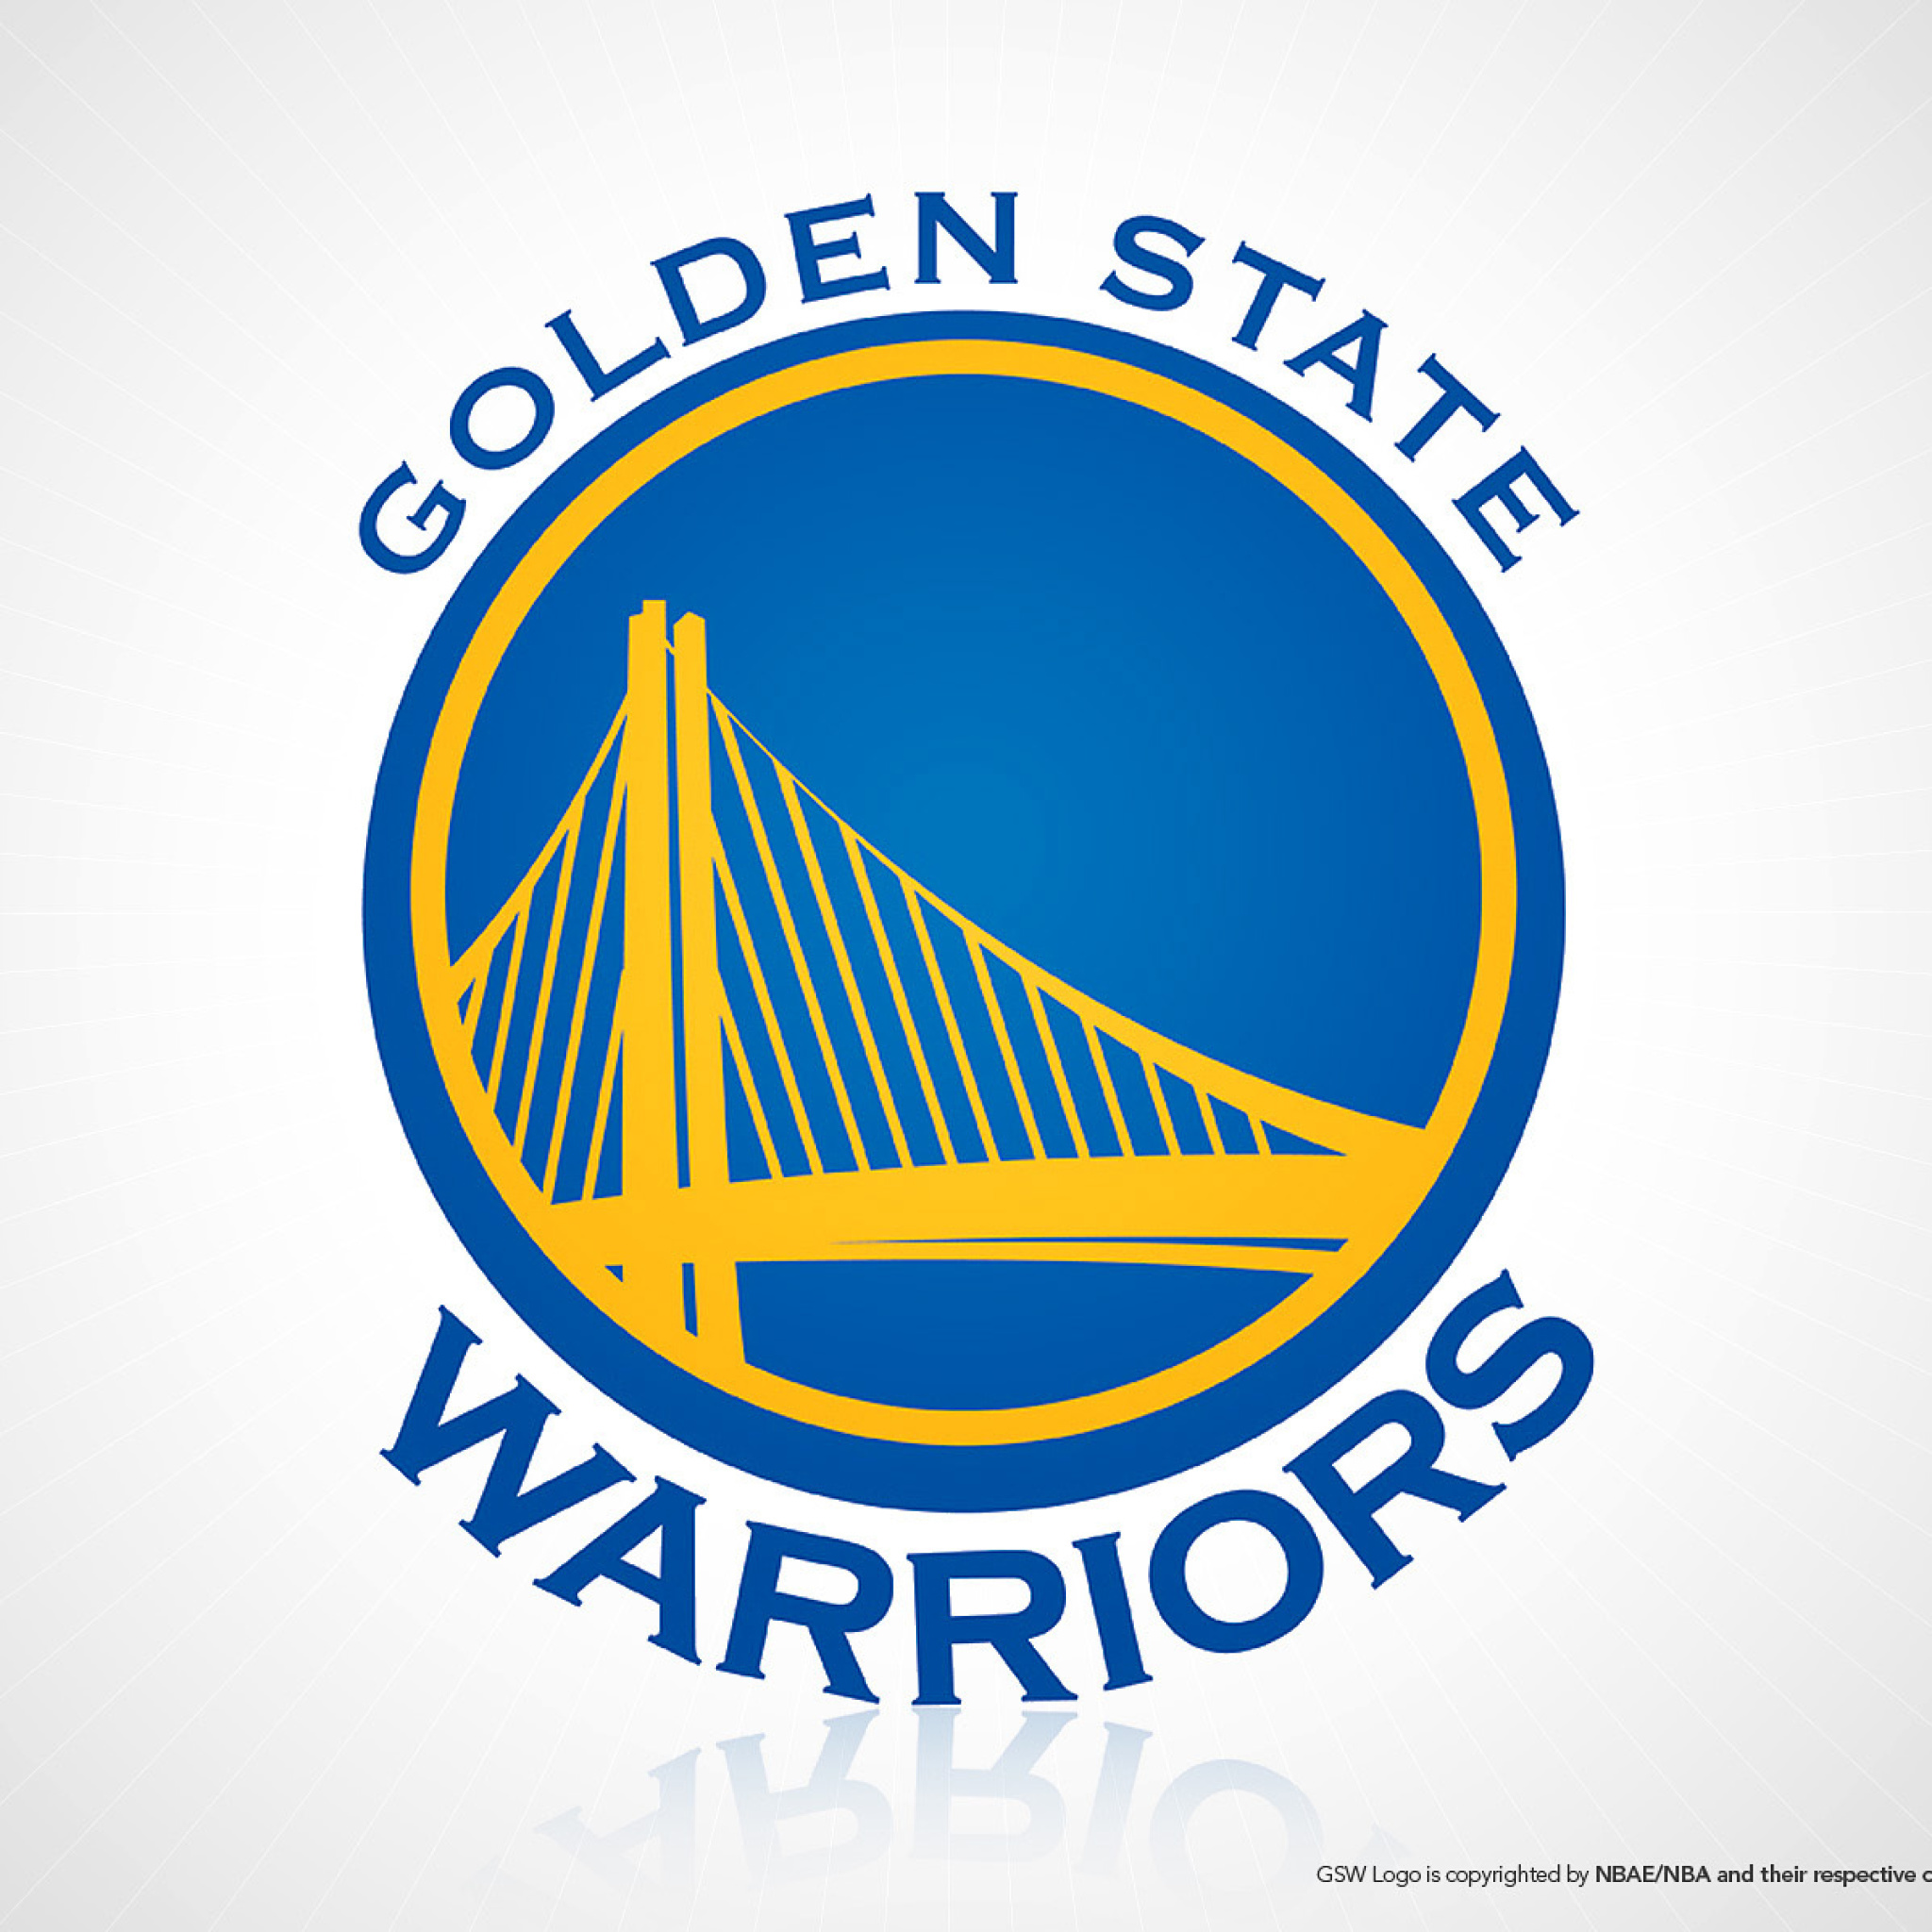 Golden State Warriors, Pacific Division wallpaper 2048x2048